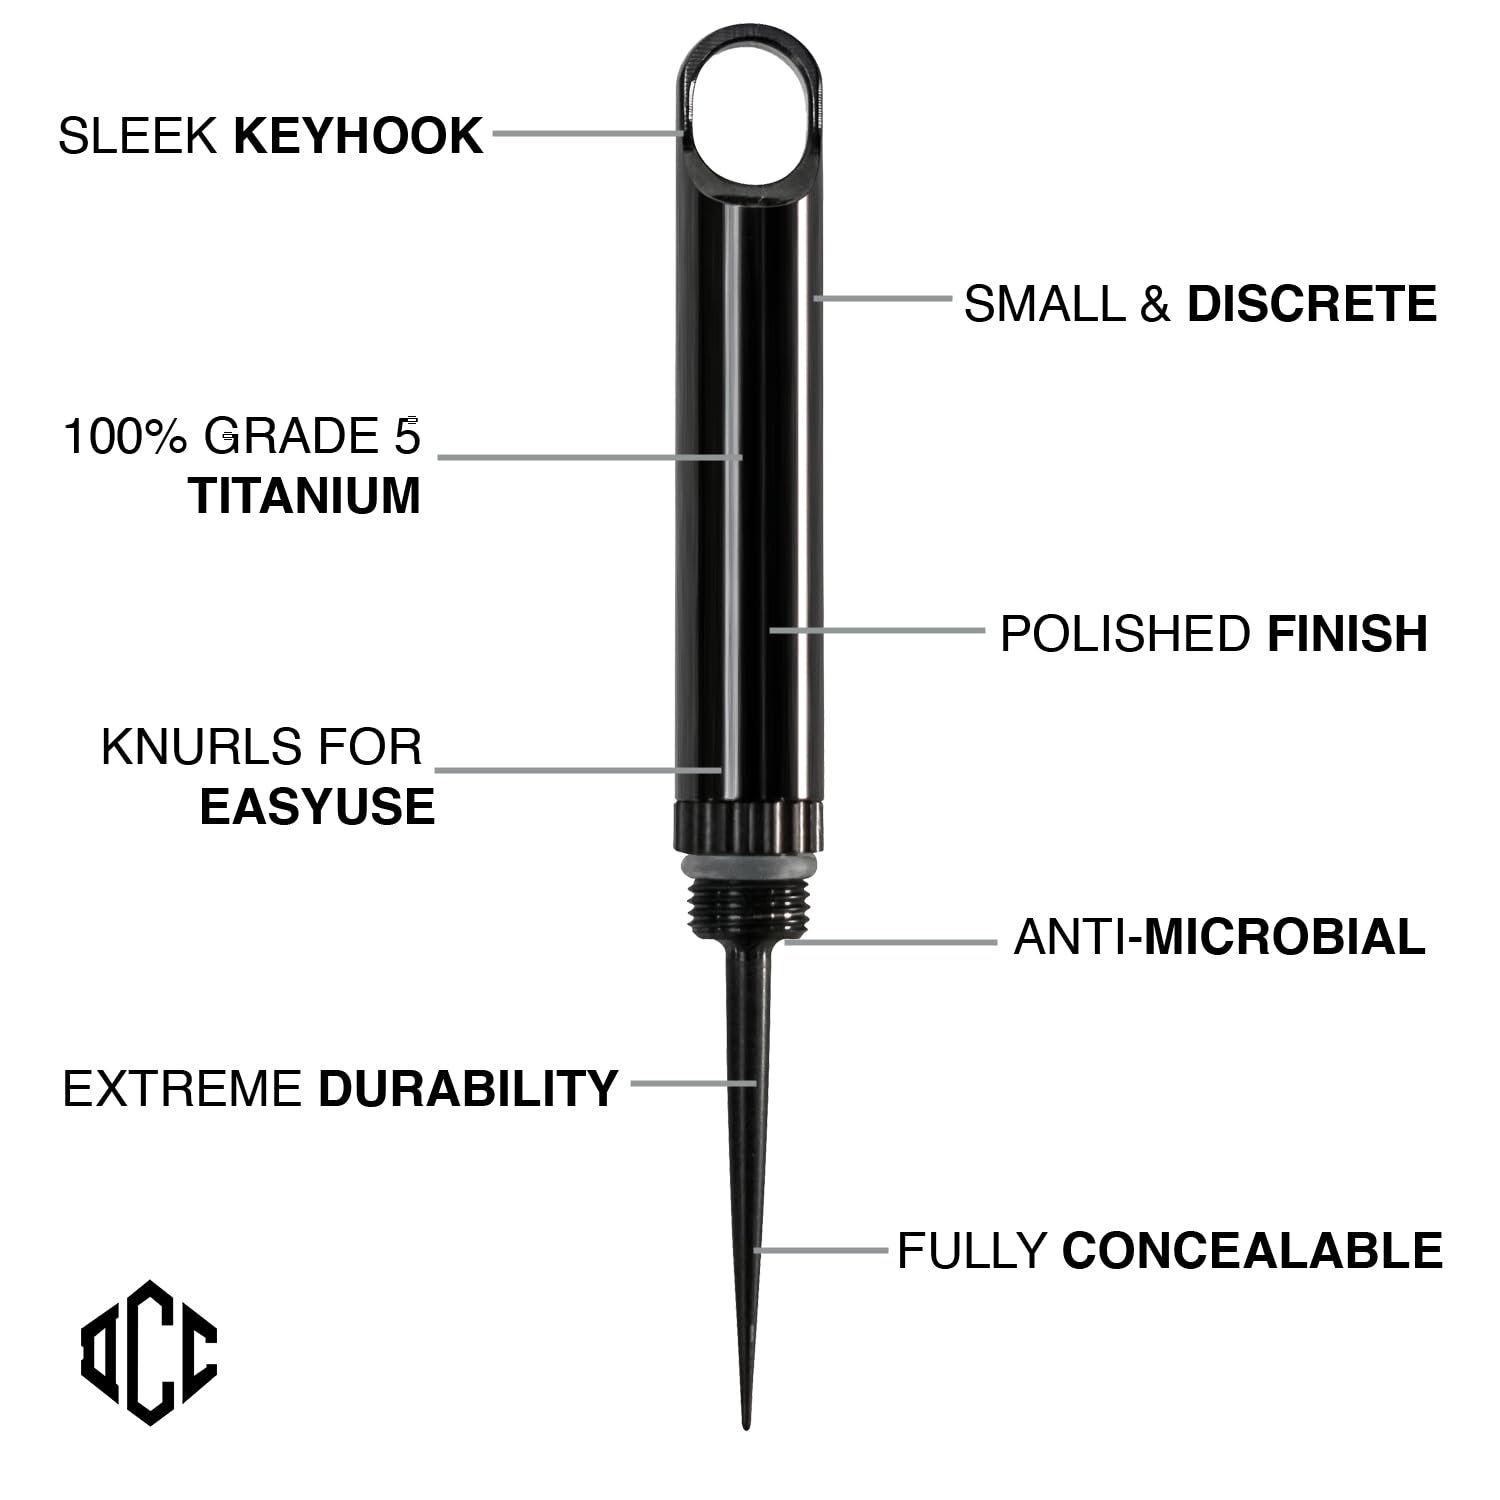 DAILYCARRYCO. TiPick Titanium Toothpick Keychain Holder - Portable Metal Travel Toothpick - Reusable EDC Micro Toothpick - Compact & Convenient - Carry On-the-Go - Titanium Construction, Black